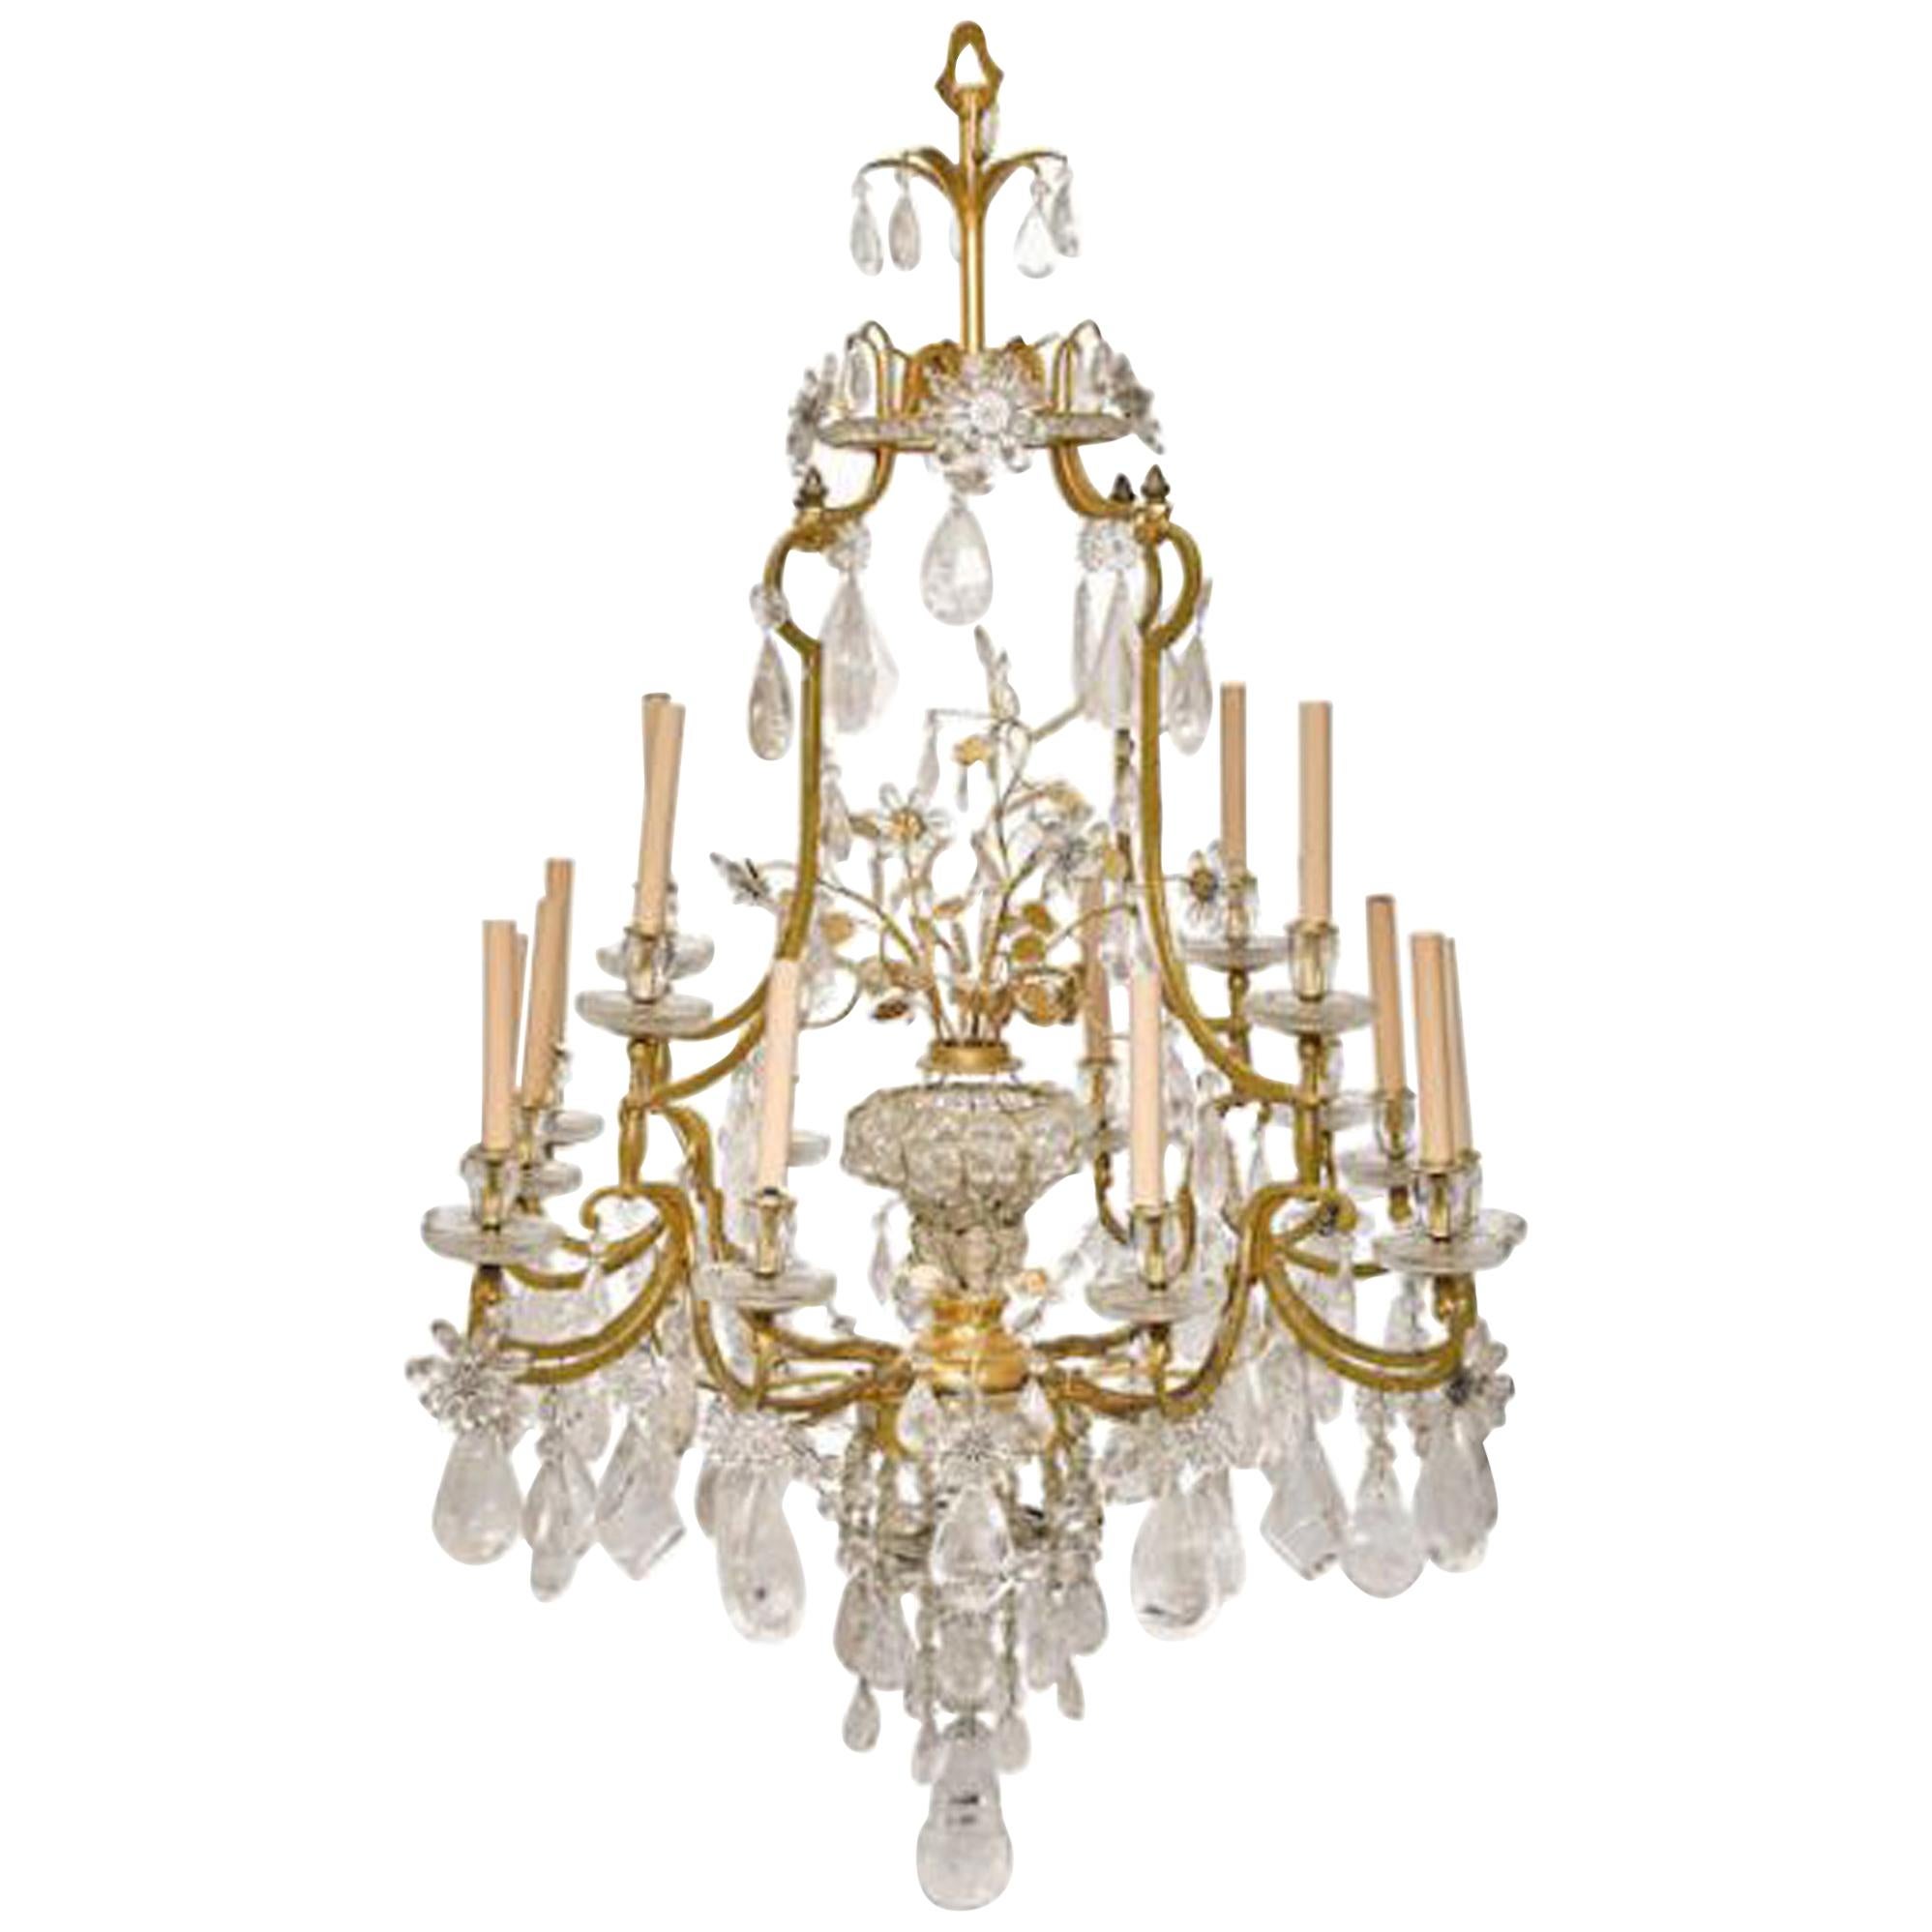 Rock Crystal and Bronze 17-Light Chandelier, circa 1900 For Sale